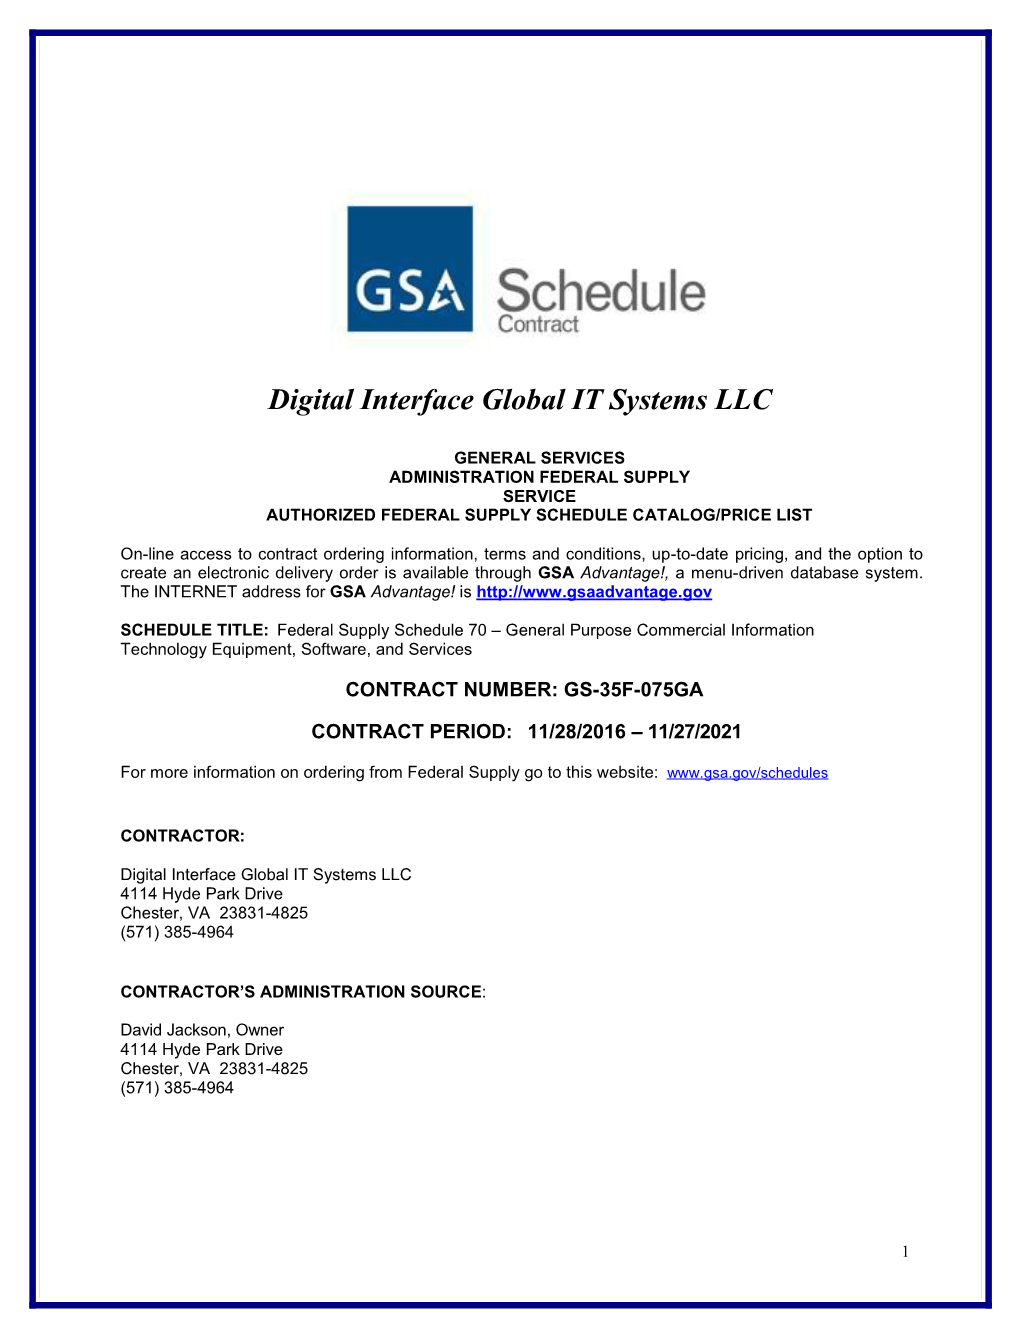 General Services Administration Federal Supply Service